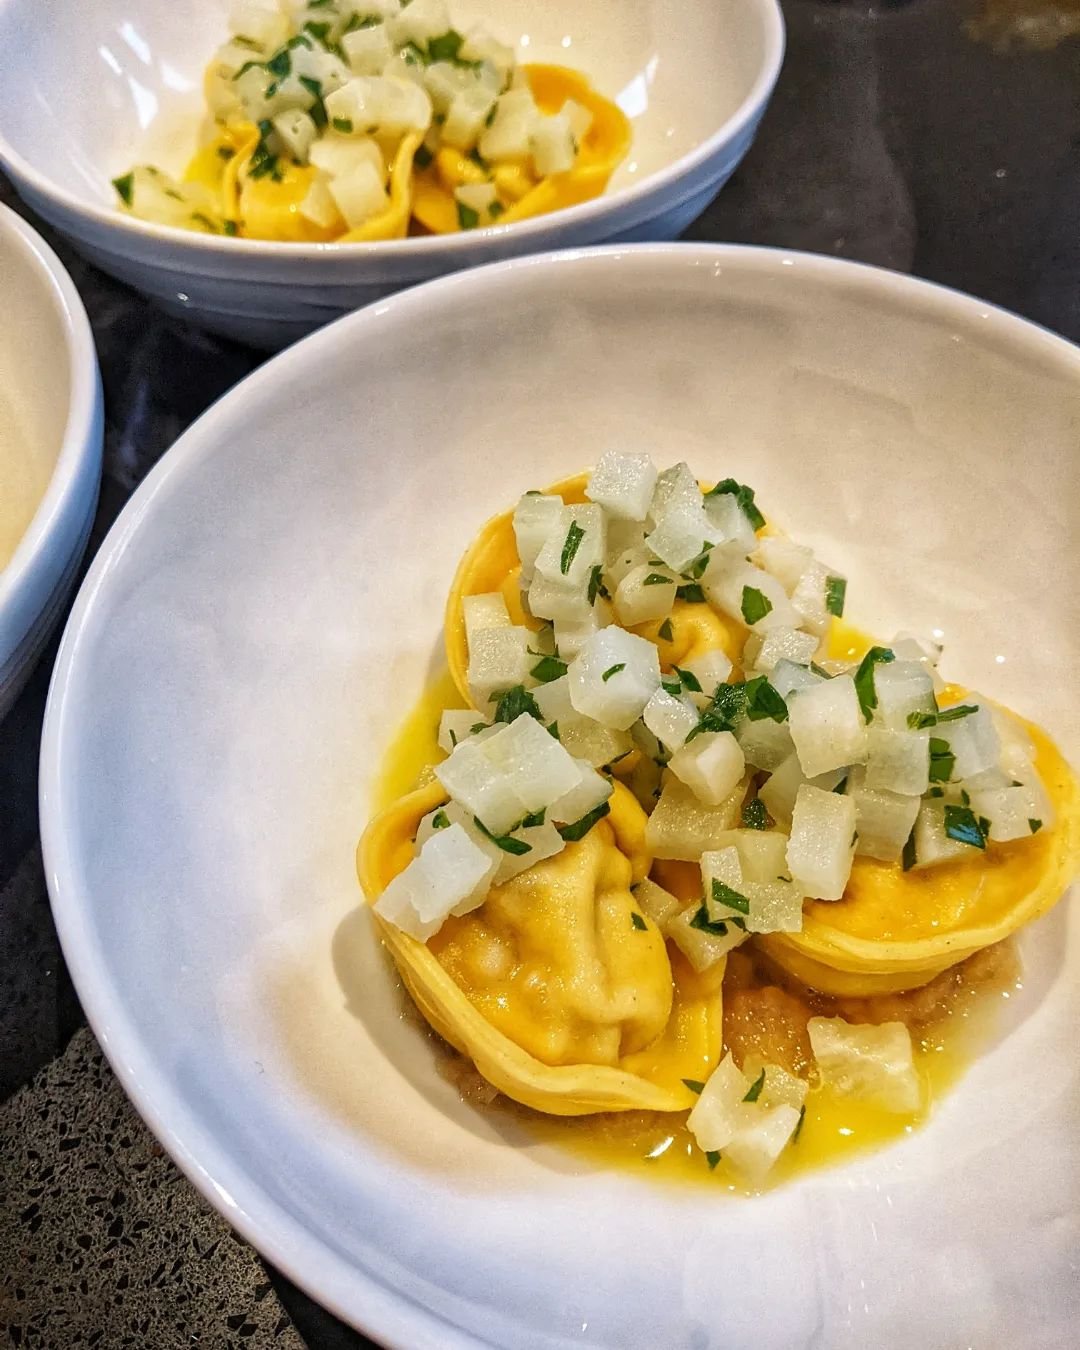 Smoked pork tortellini sitting on a bed of onion jam, with turnips and a chicken butter sauce ✨ last night's private dining event's starter was such a hit! Always love the process of making fresh pasta 🧡